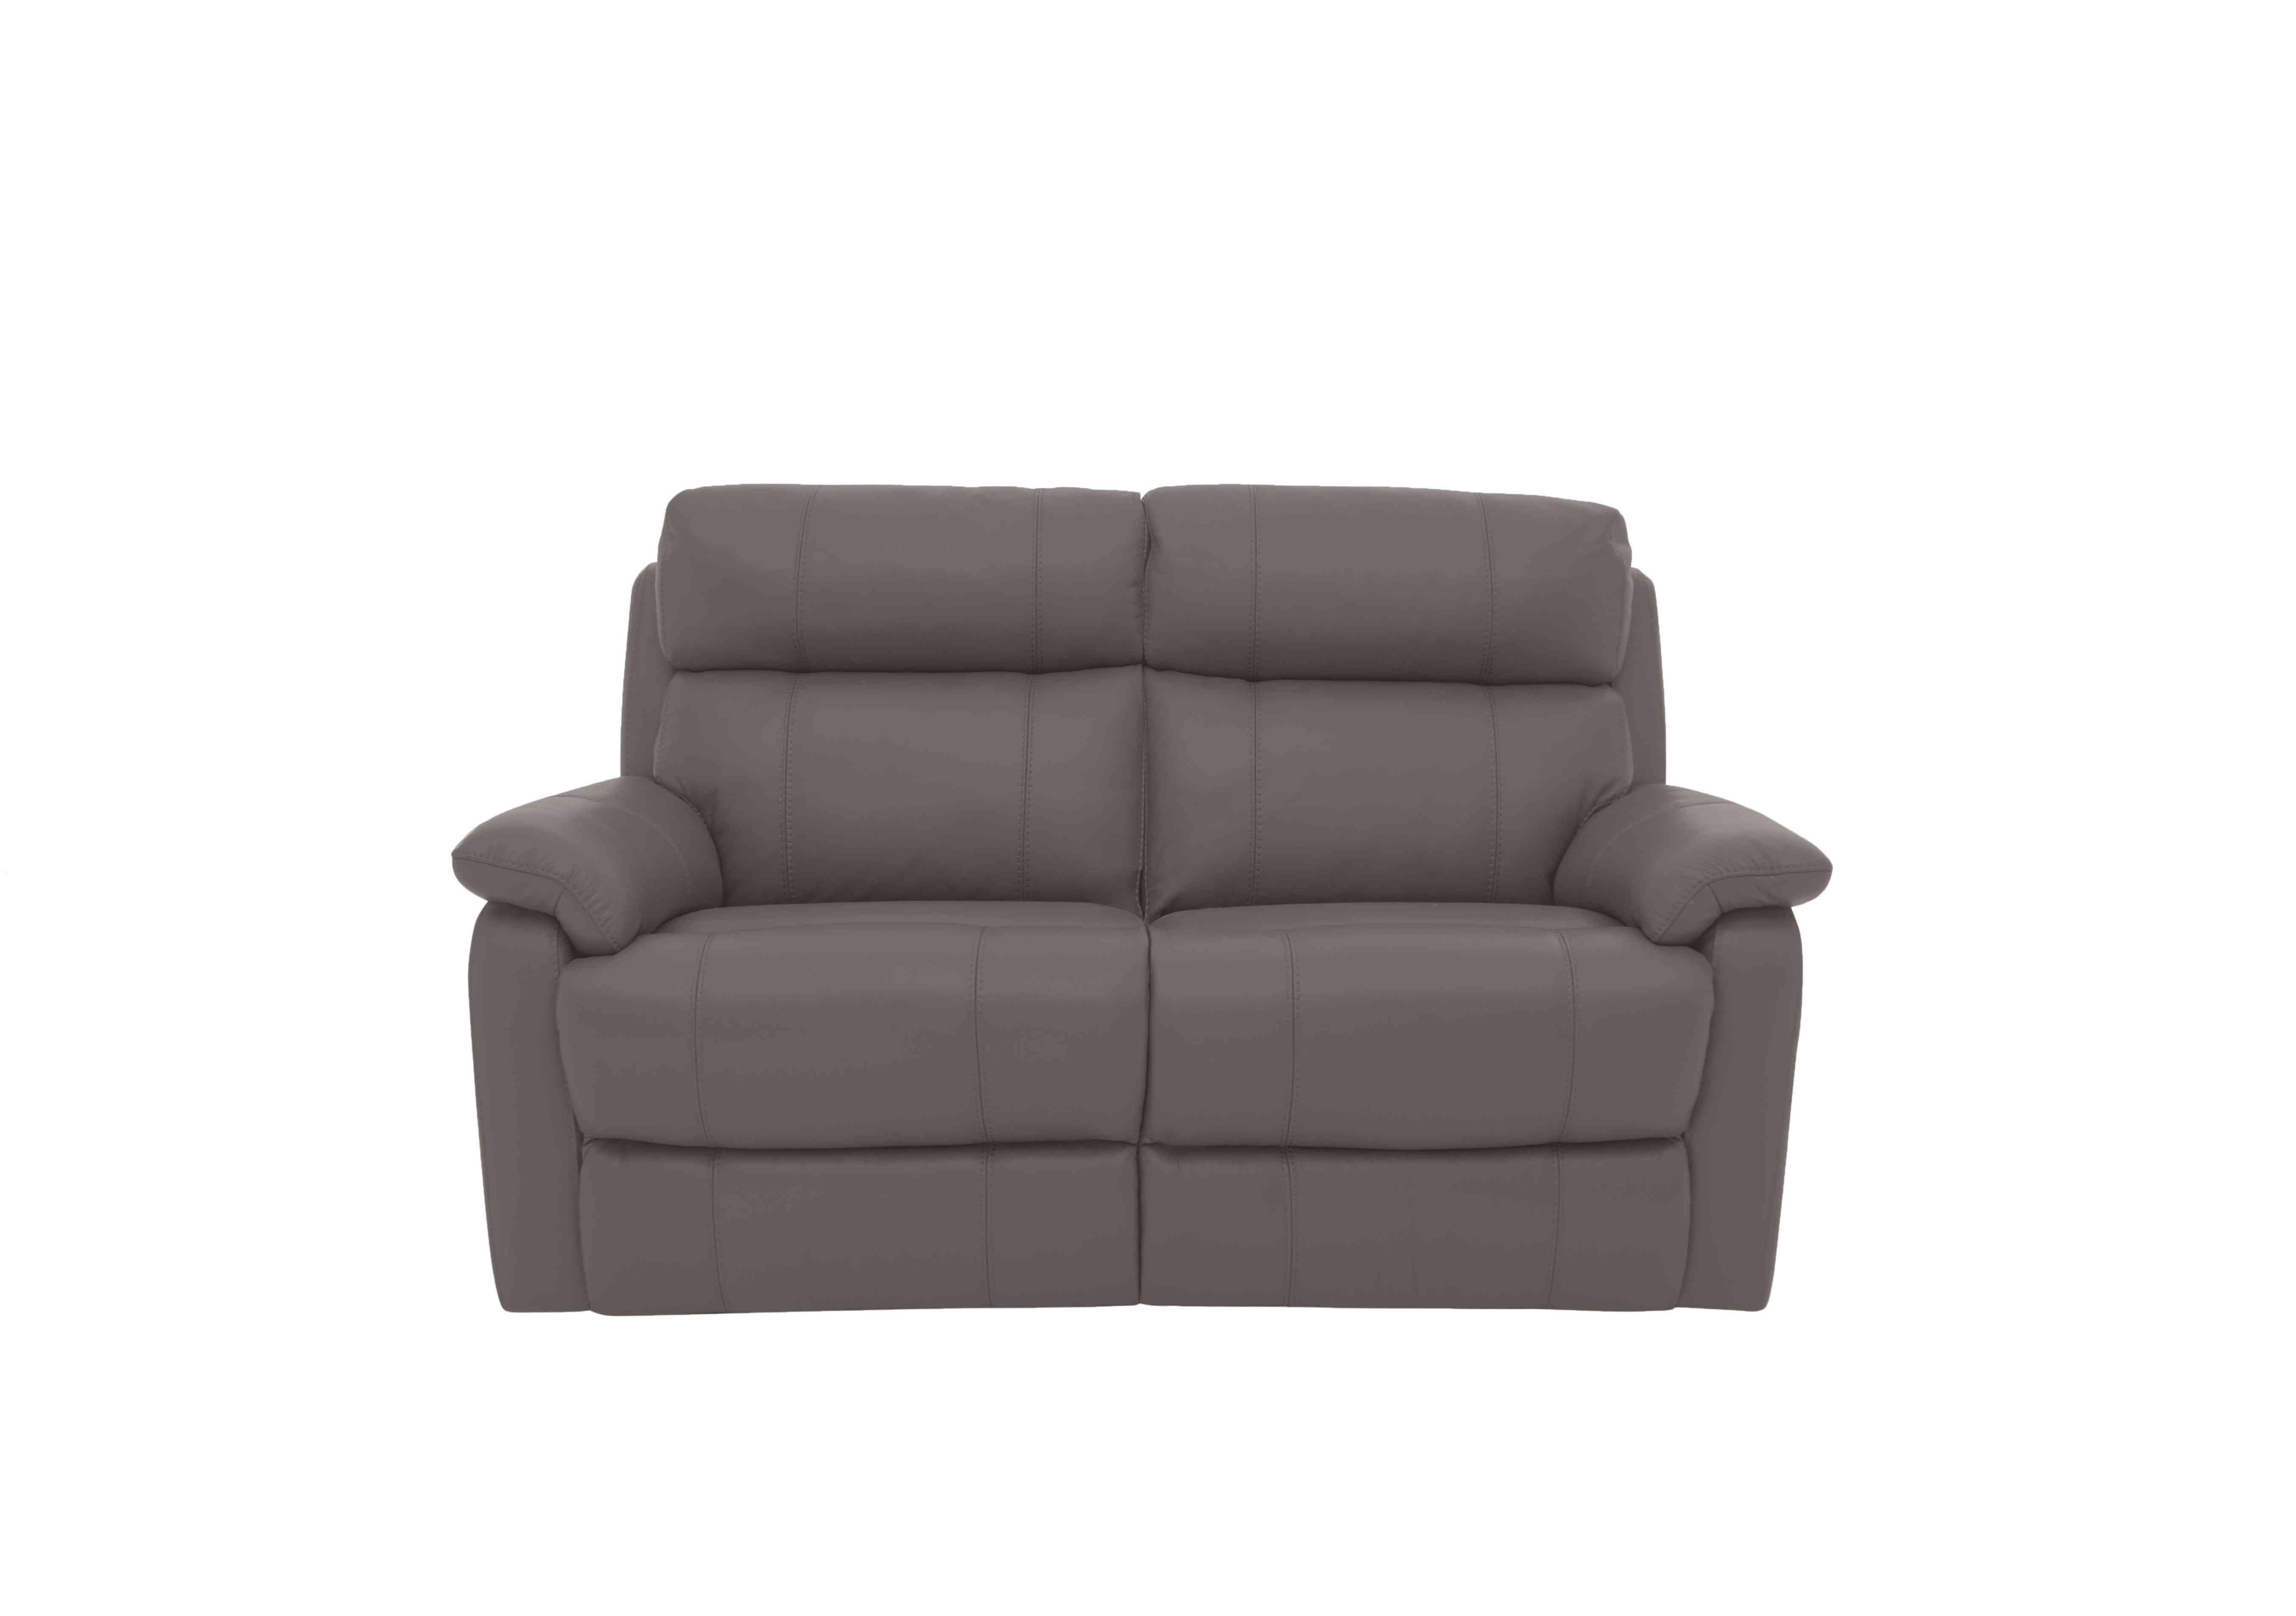 Relax Station Komodo 2 Seater Power Leather Sofa in Bv-042e Elephant on Furniture Village